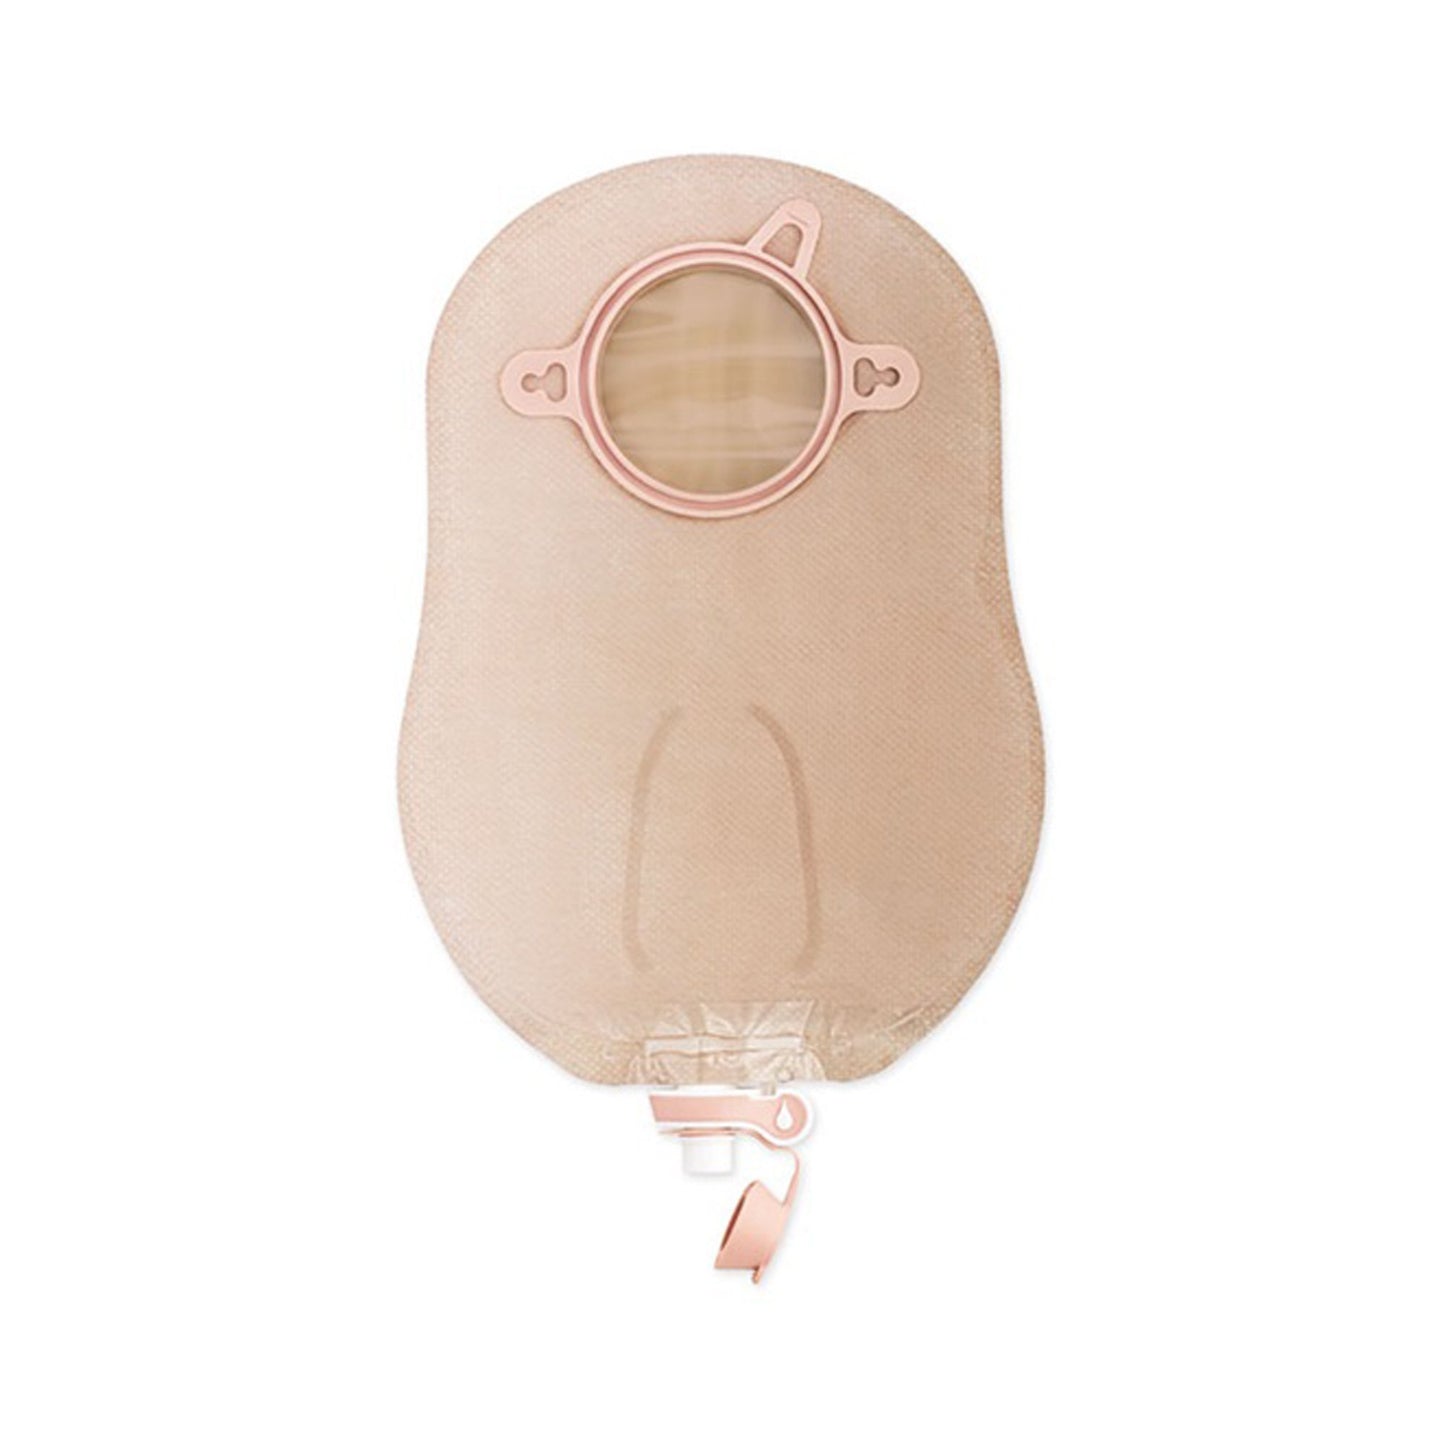 New Image™ Drainable Beige Urostomy Pouch, 9 Inch Length, 2.75 Inch Flange, 10 ct